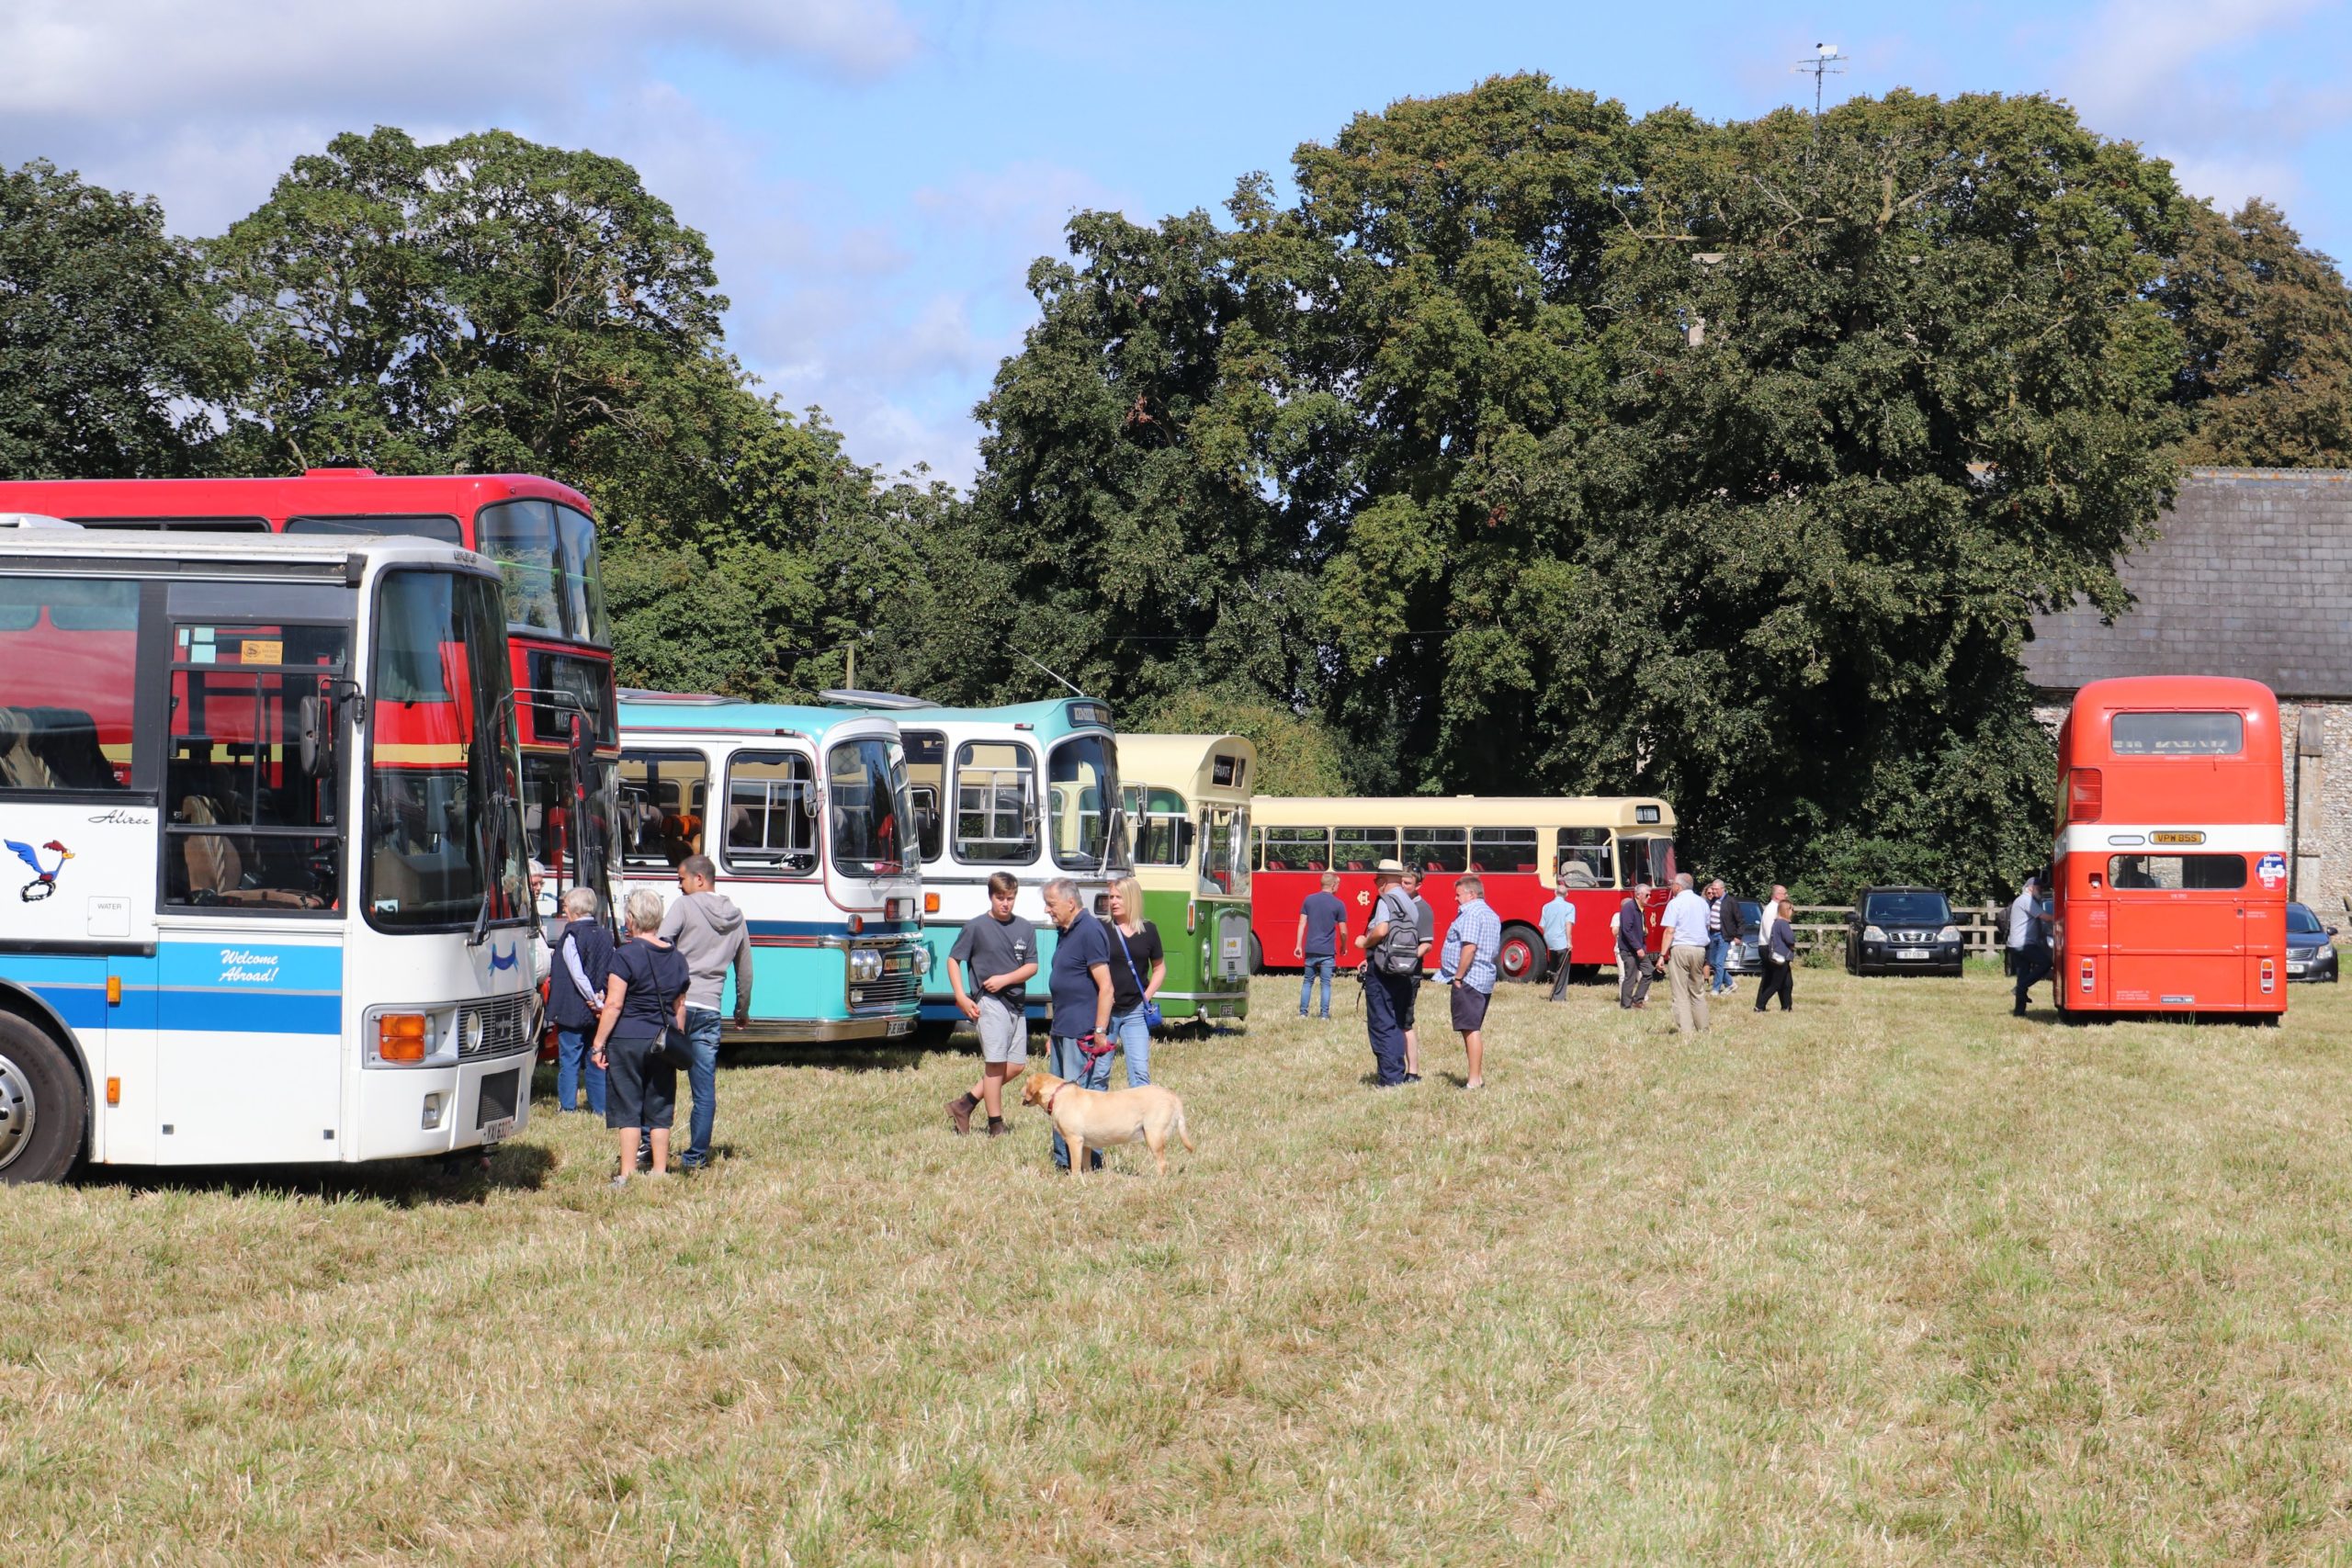 A scene from the centenary event showing a few of the vehicles present 